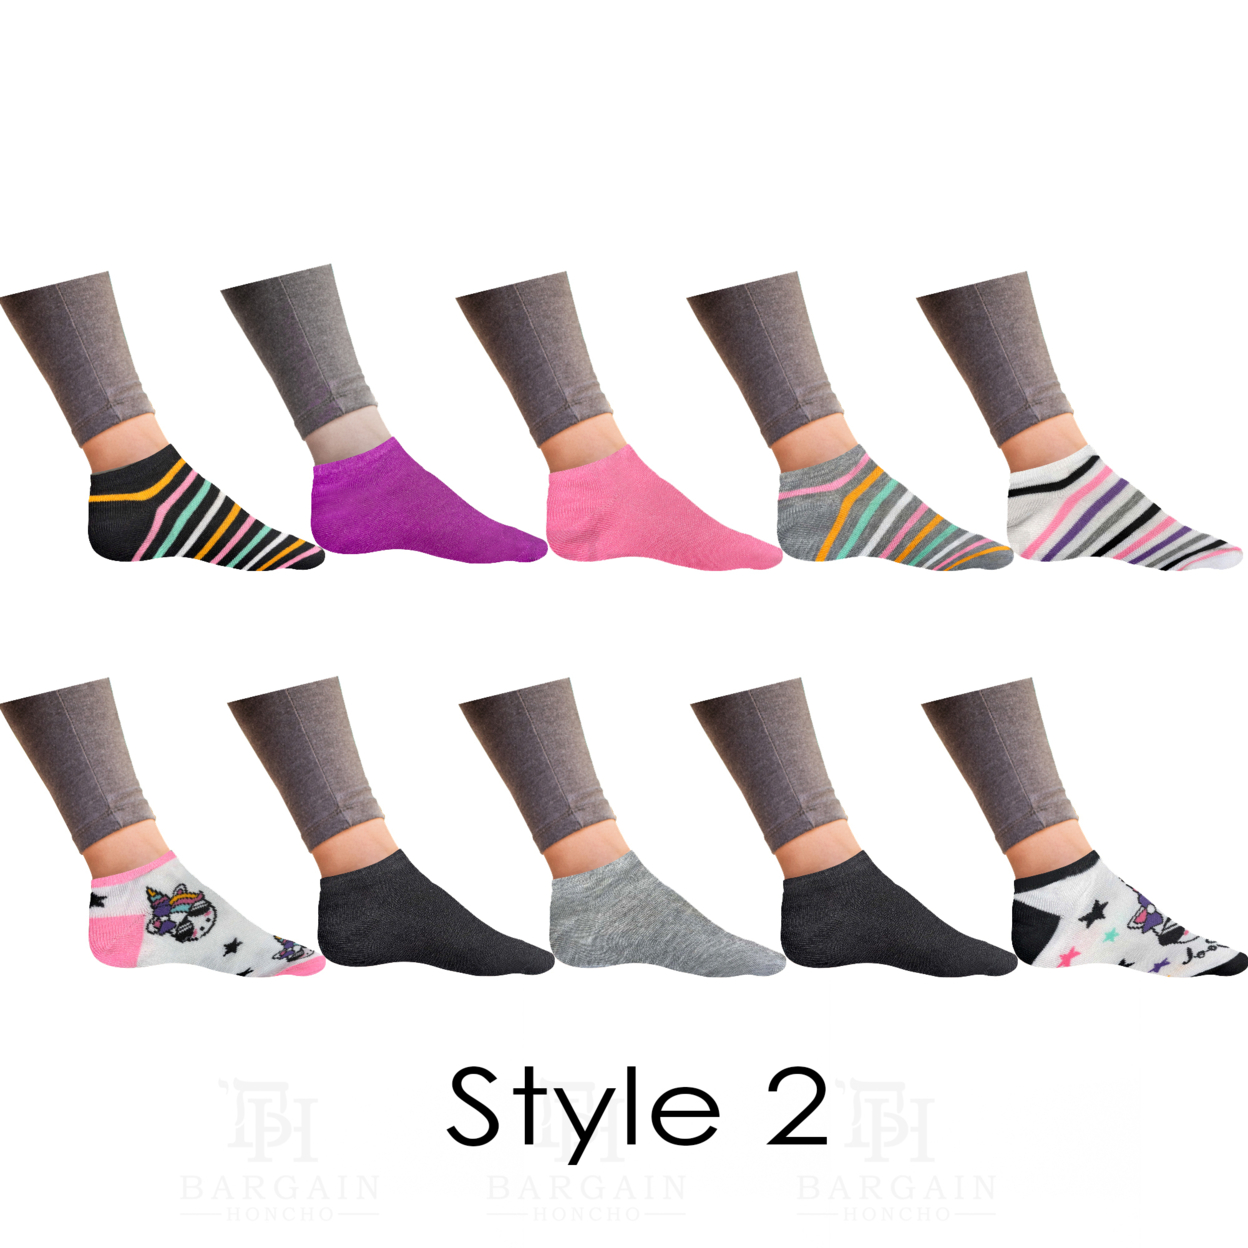 20-Pairs: Women’s Breathable Colorful Fun No Show Low Cut Ankle Socks - 2 & 3